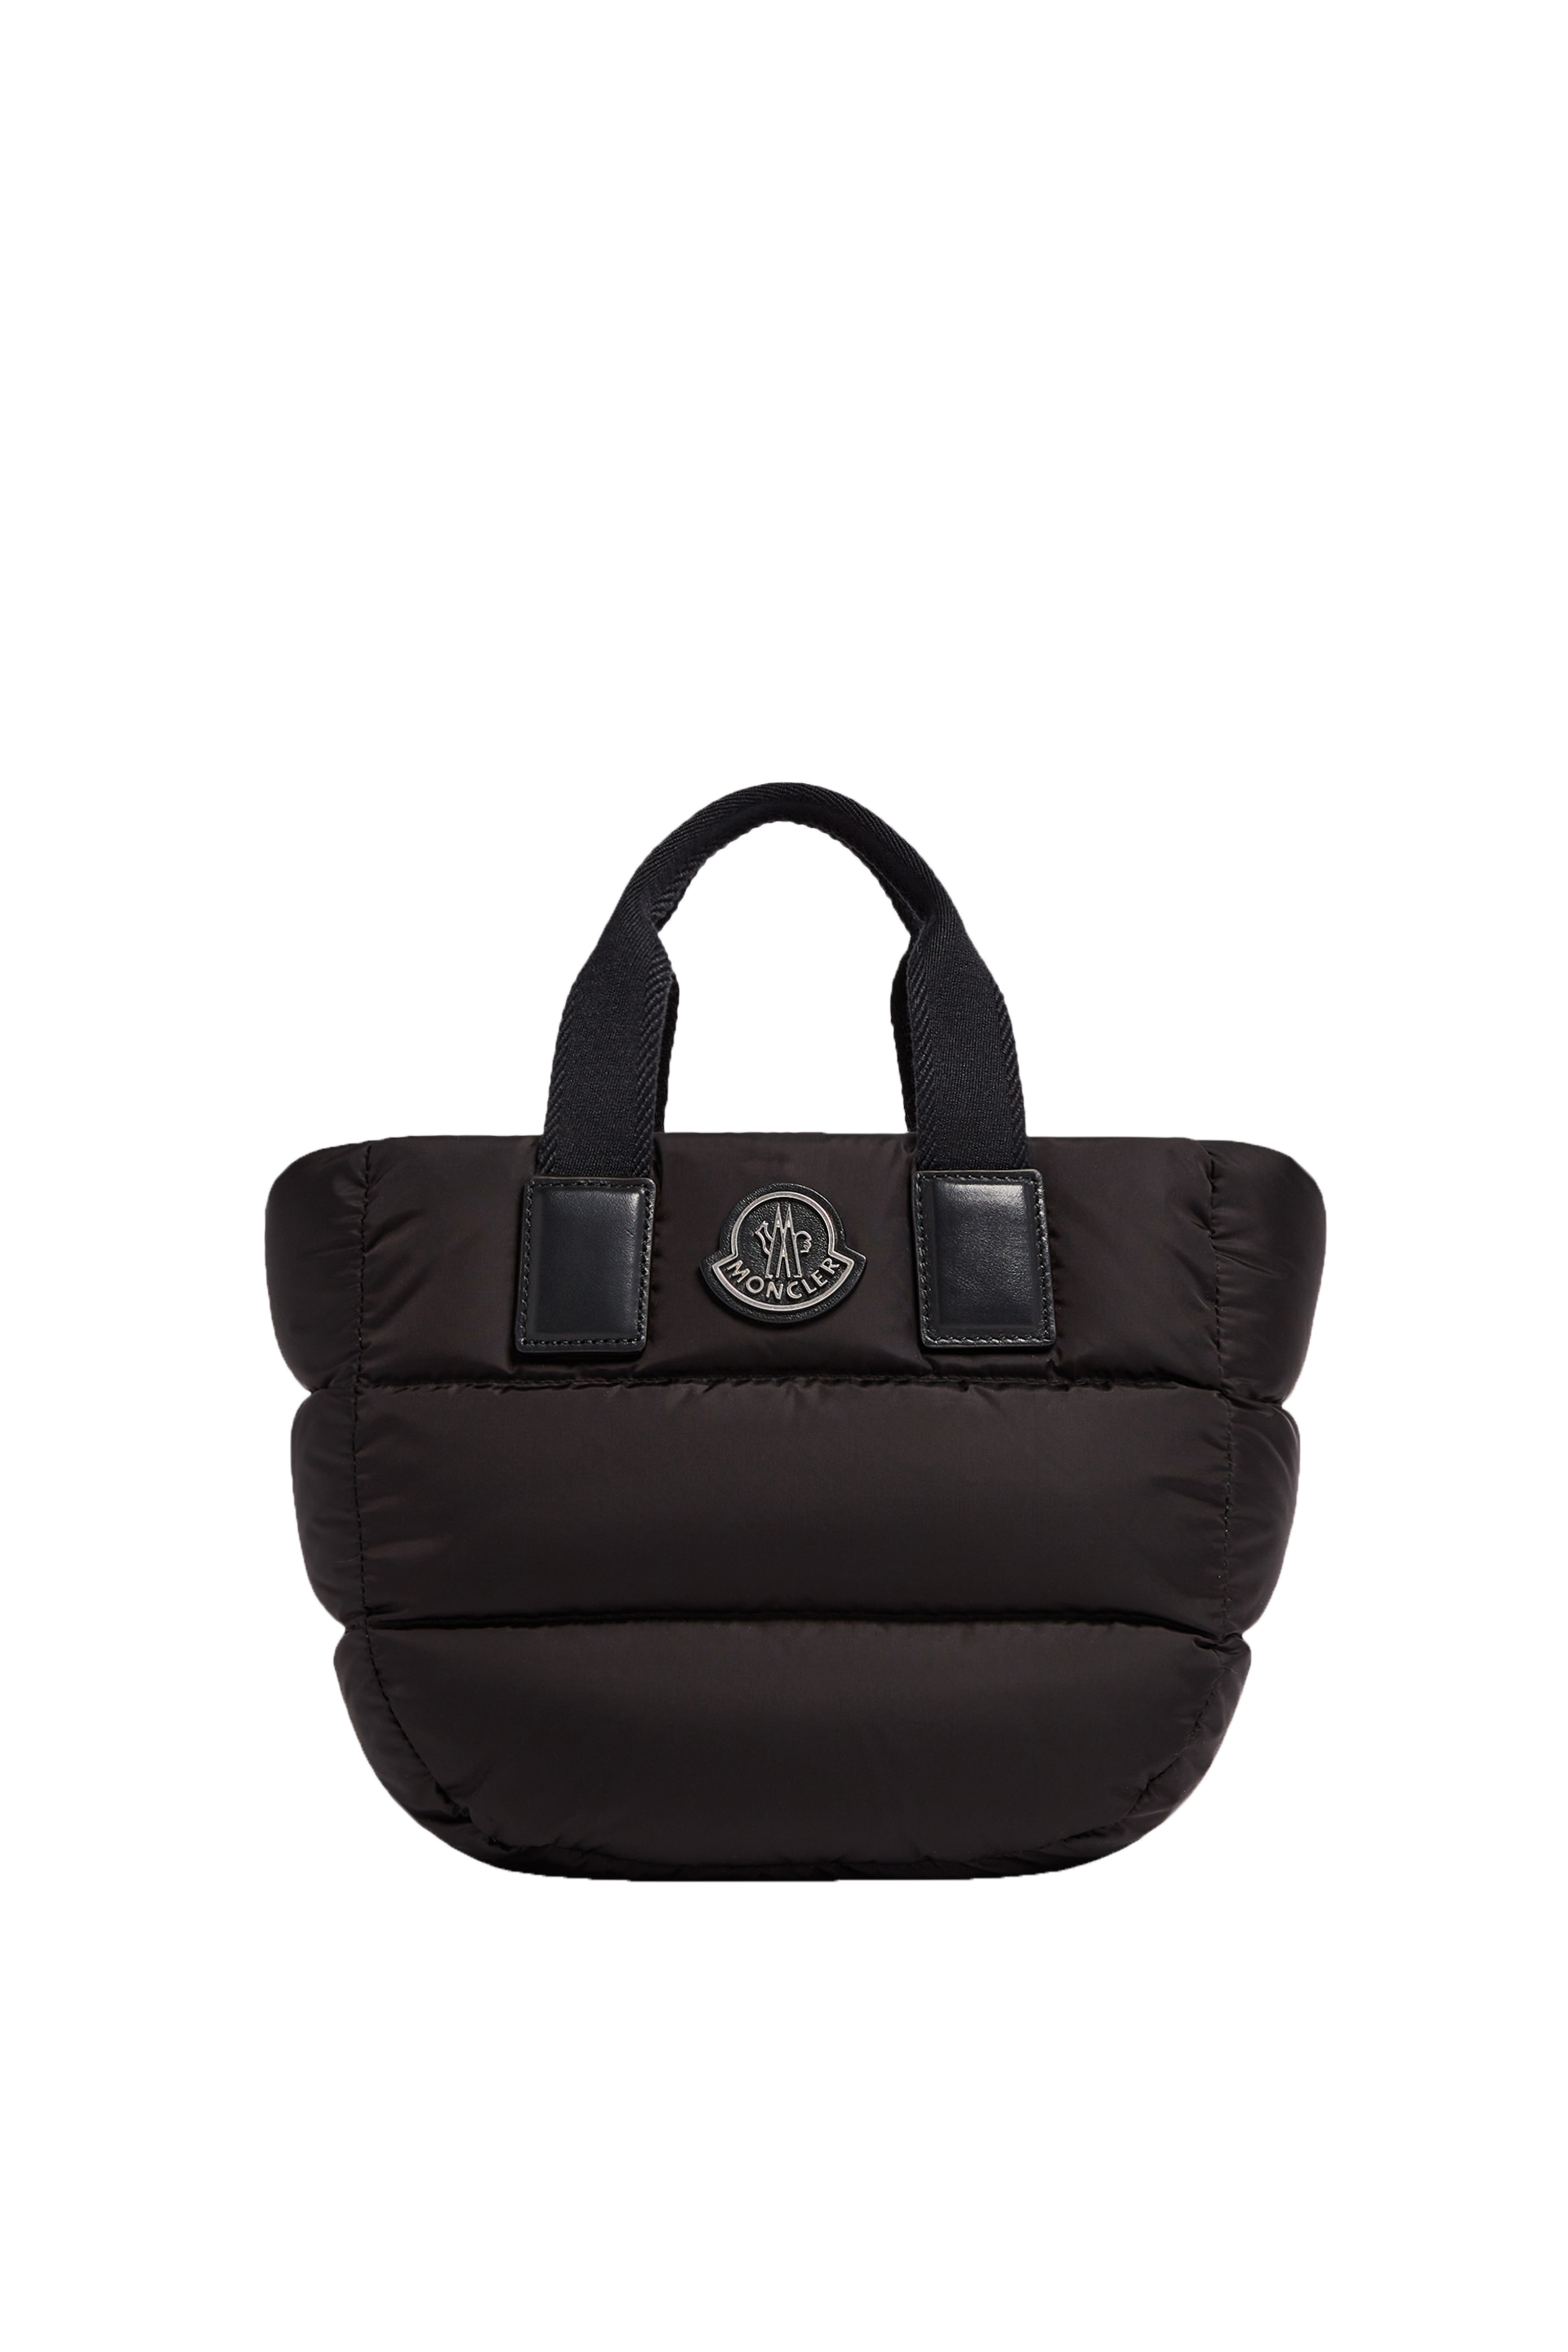 Moncler Collection Caradoc Mini Tote Bag, Black, Size: One Size